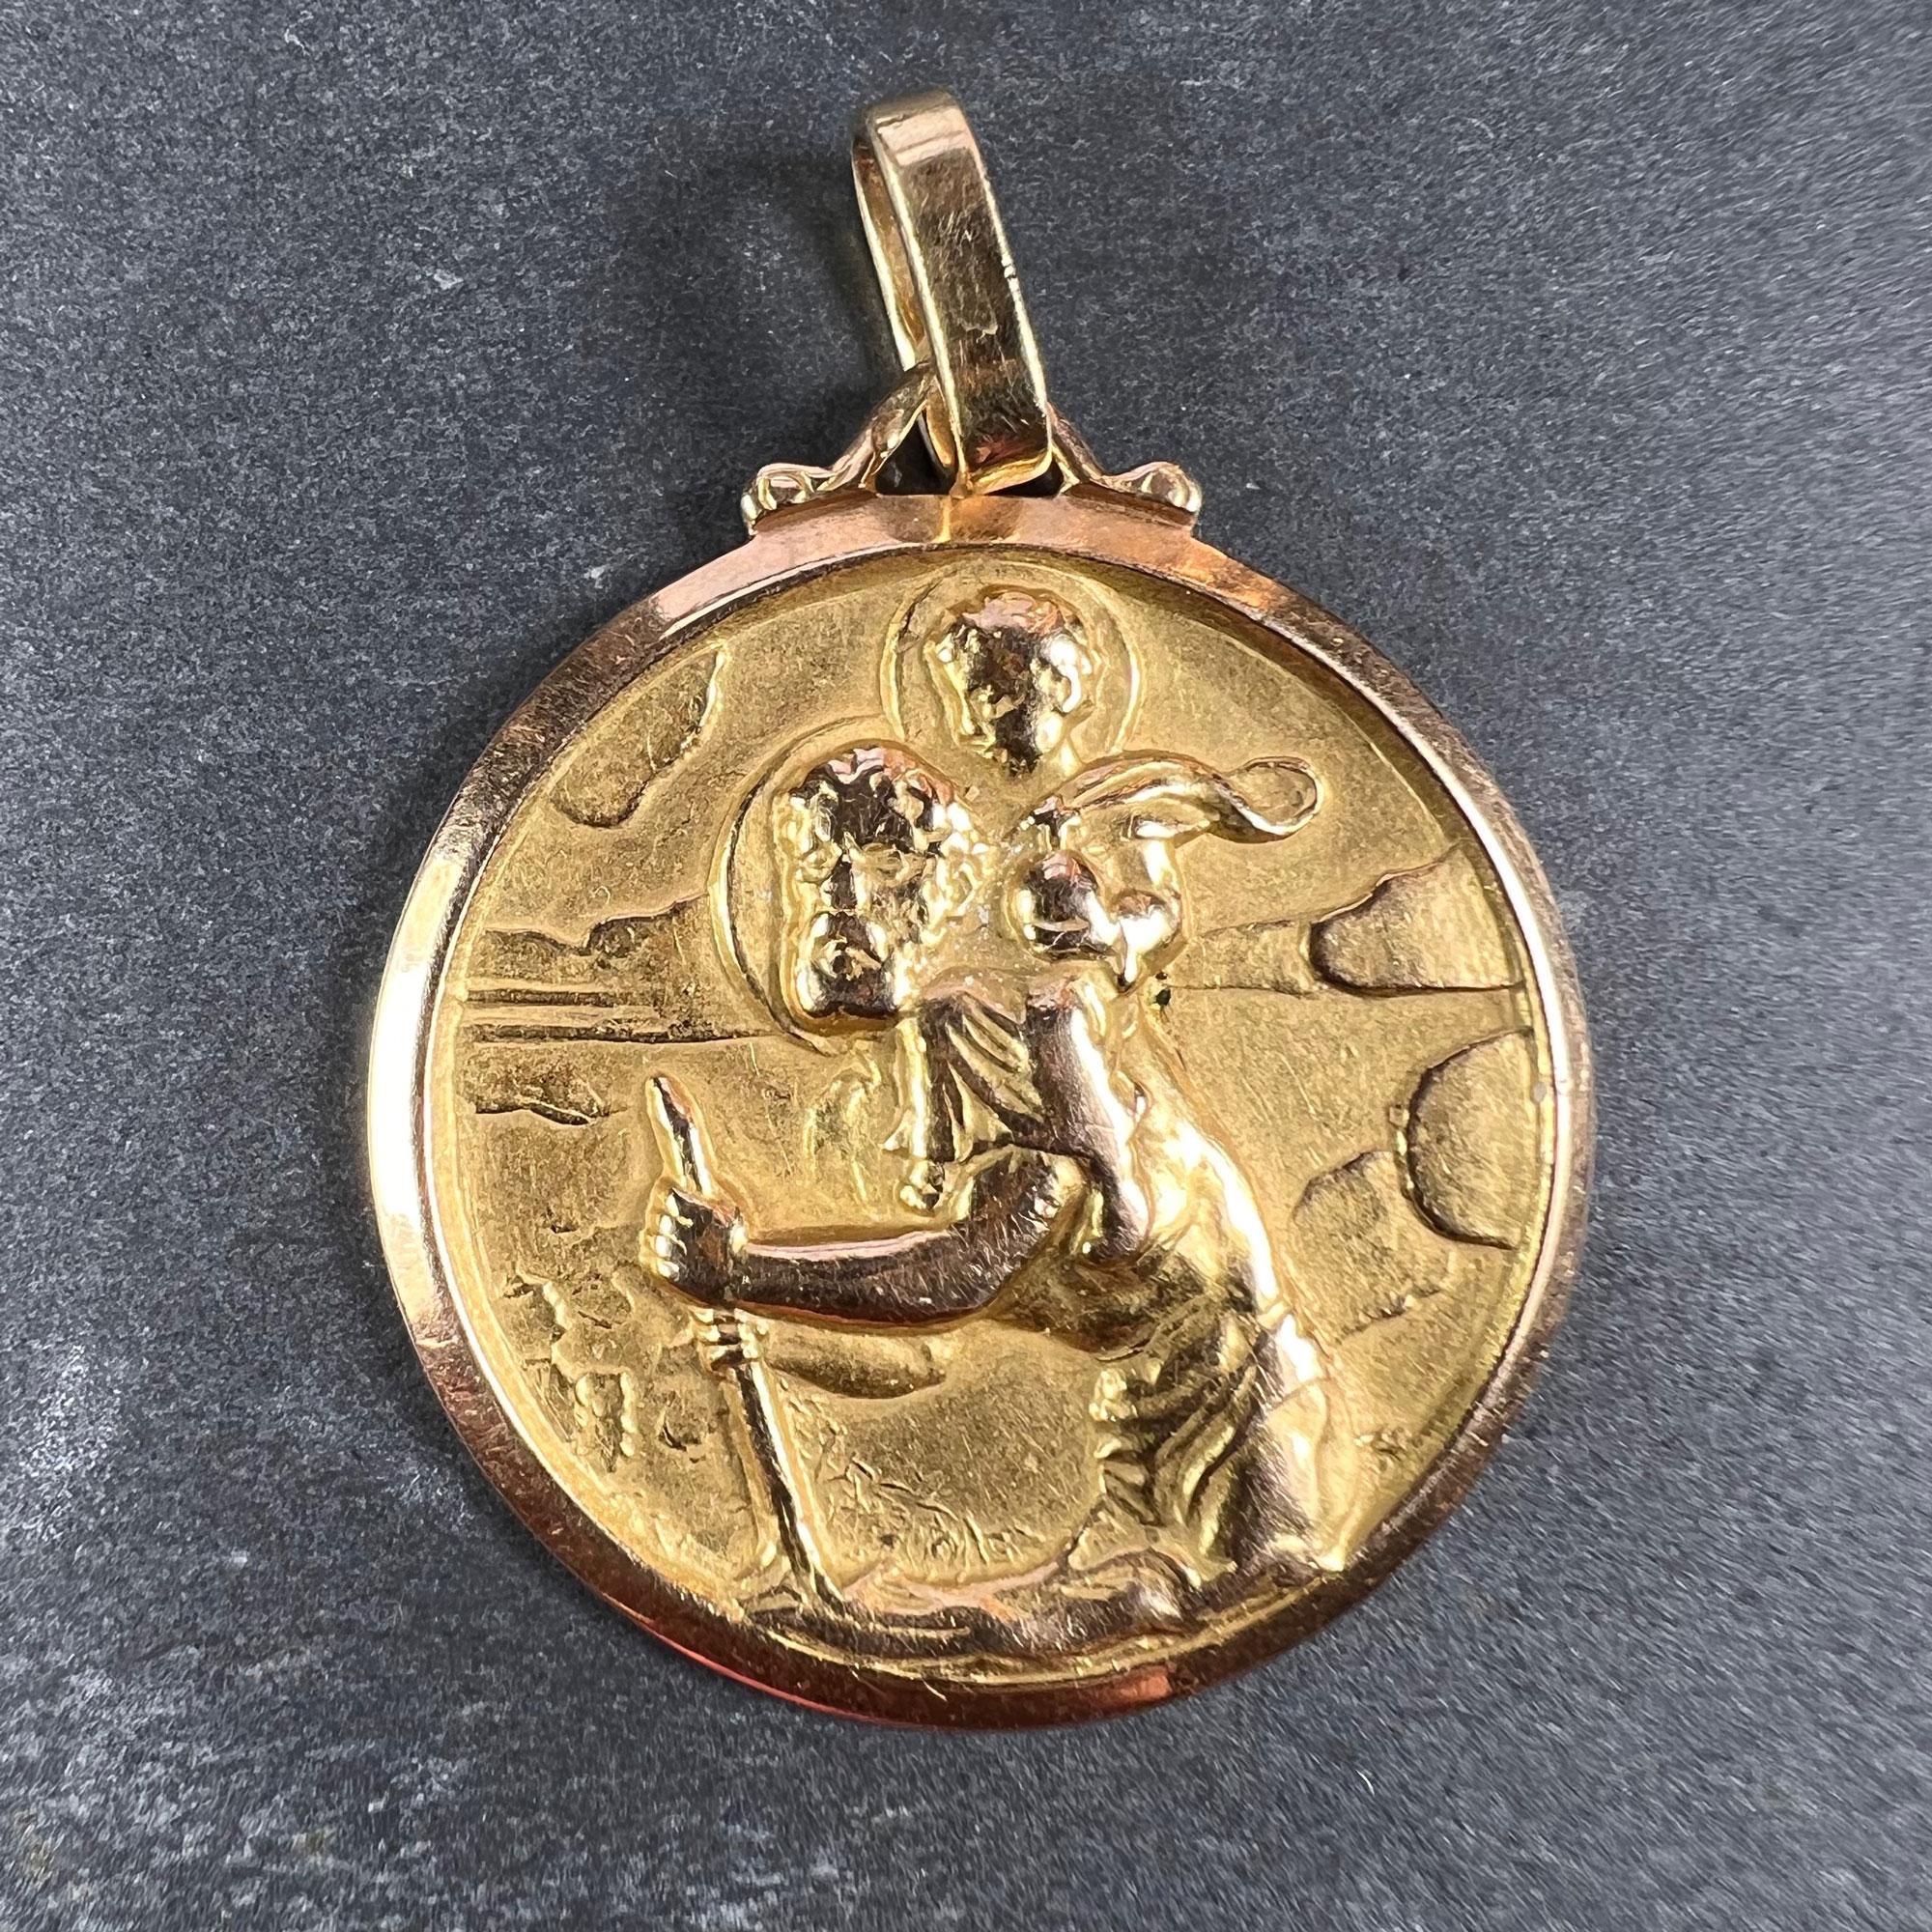 A French 18 karat (18K) yellow gold charm pendant designed as a medal depicting Saint Christopher carrying the infant Christ over the river. Stamped with the eagle mark for 18 karat gold and French manufacture.  

Dimensions: 2.8 x 2.6 x 0.2 cm (not